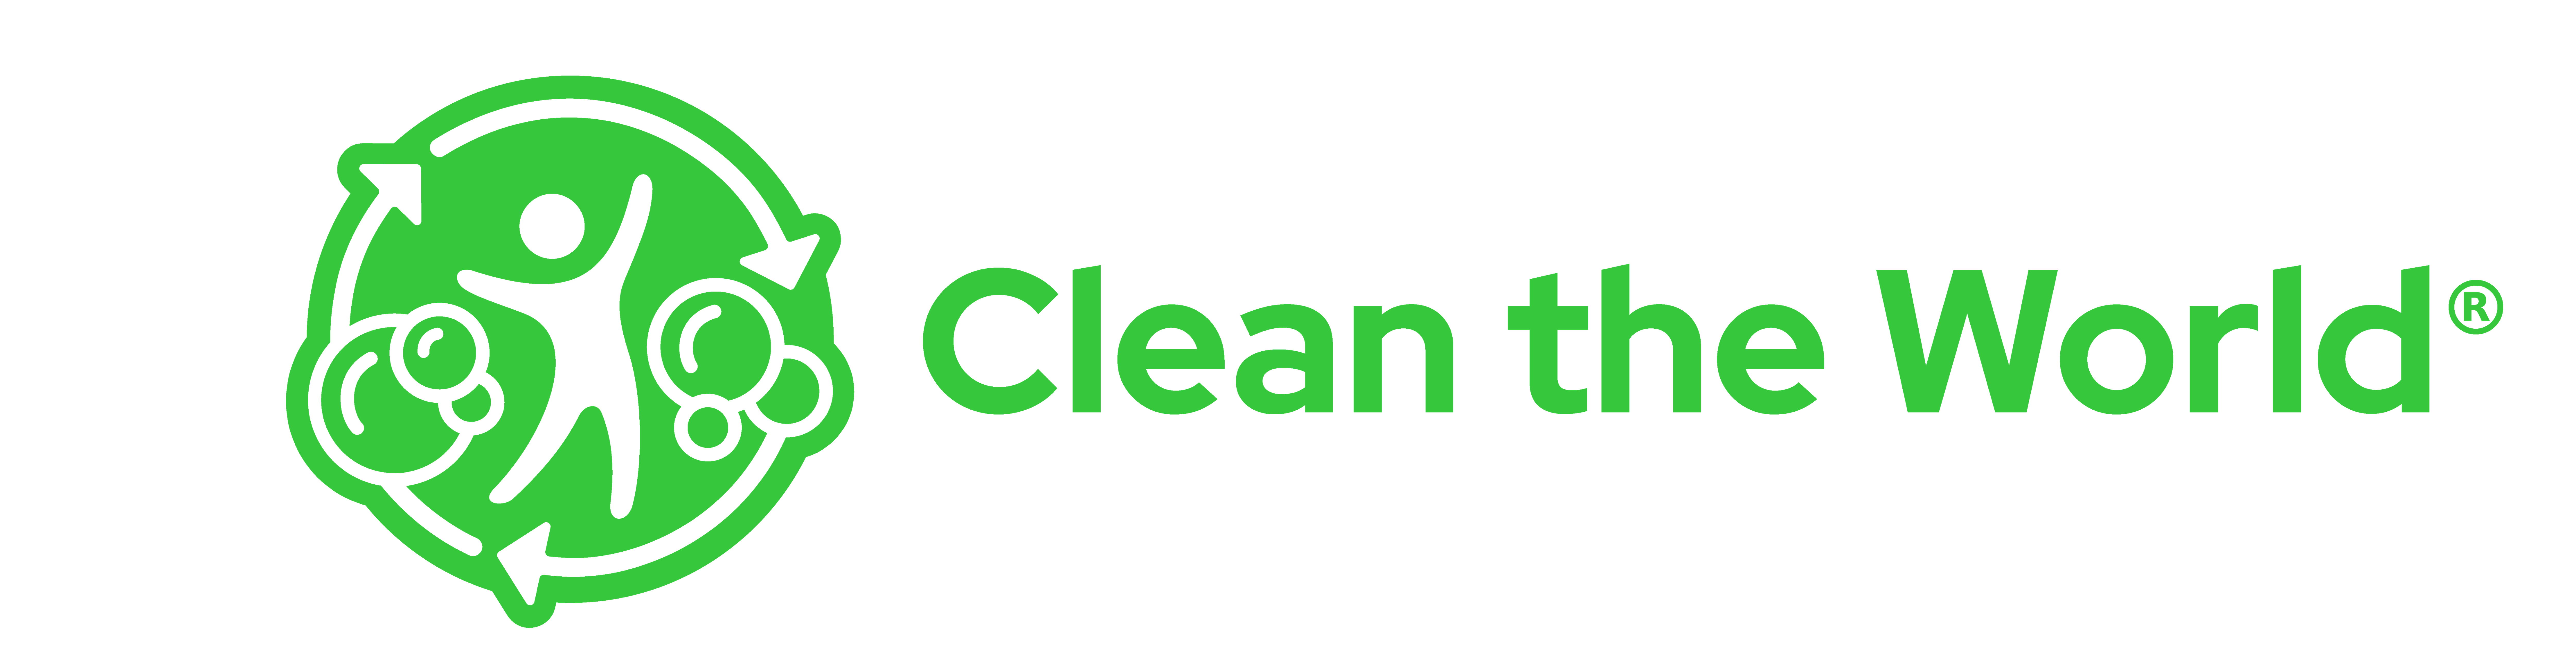 Clean the World